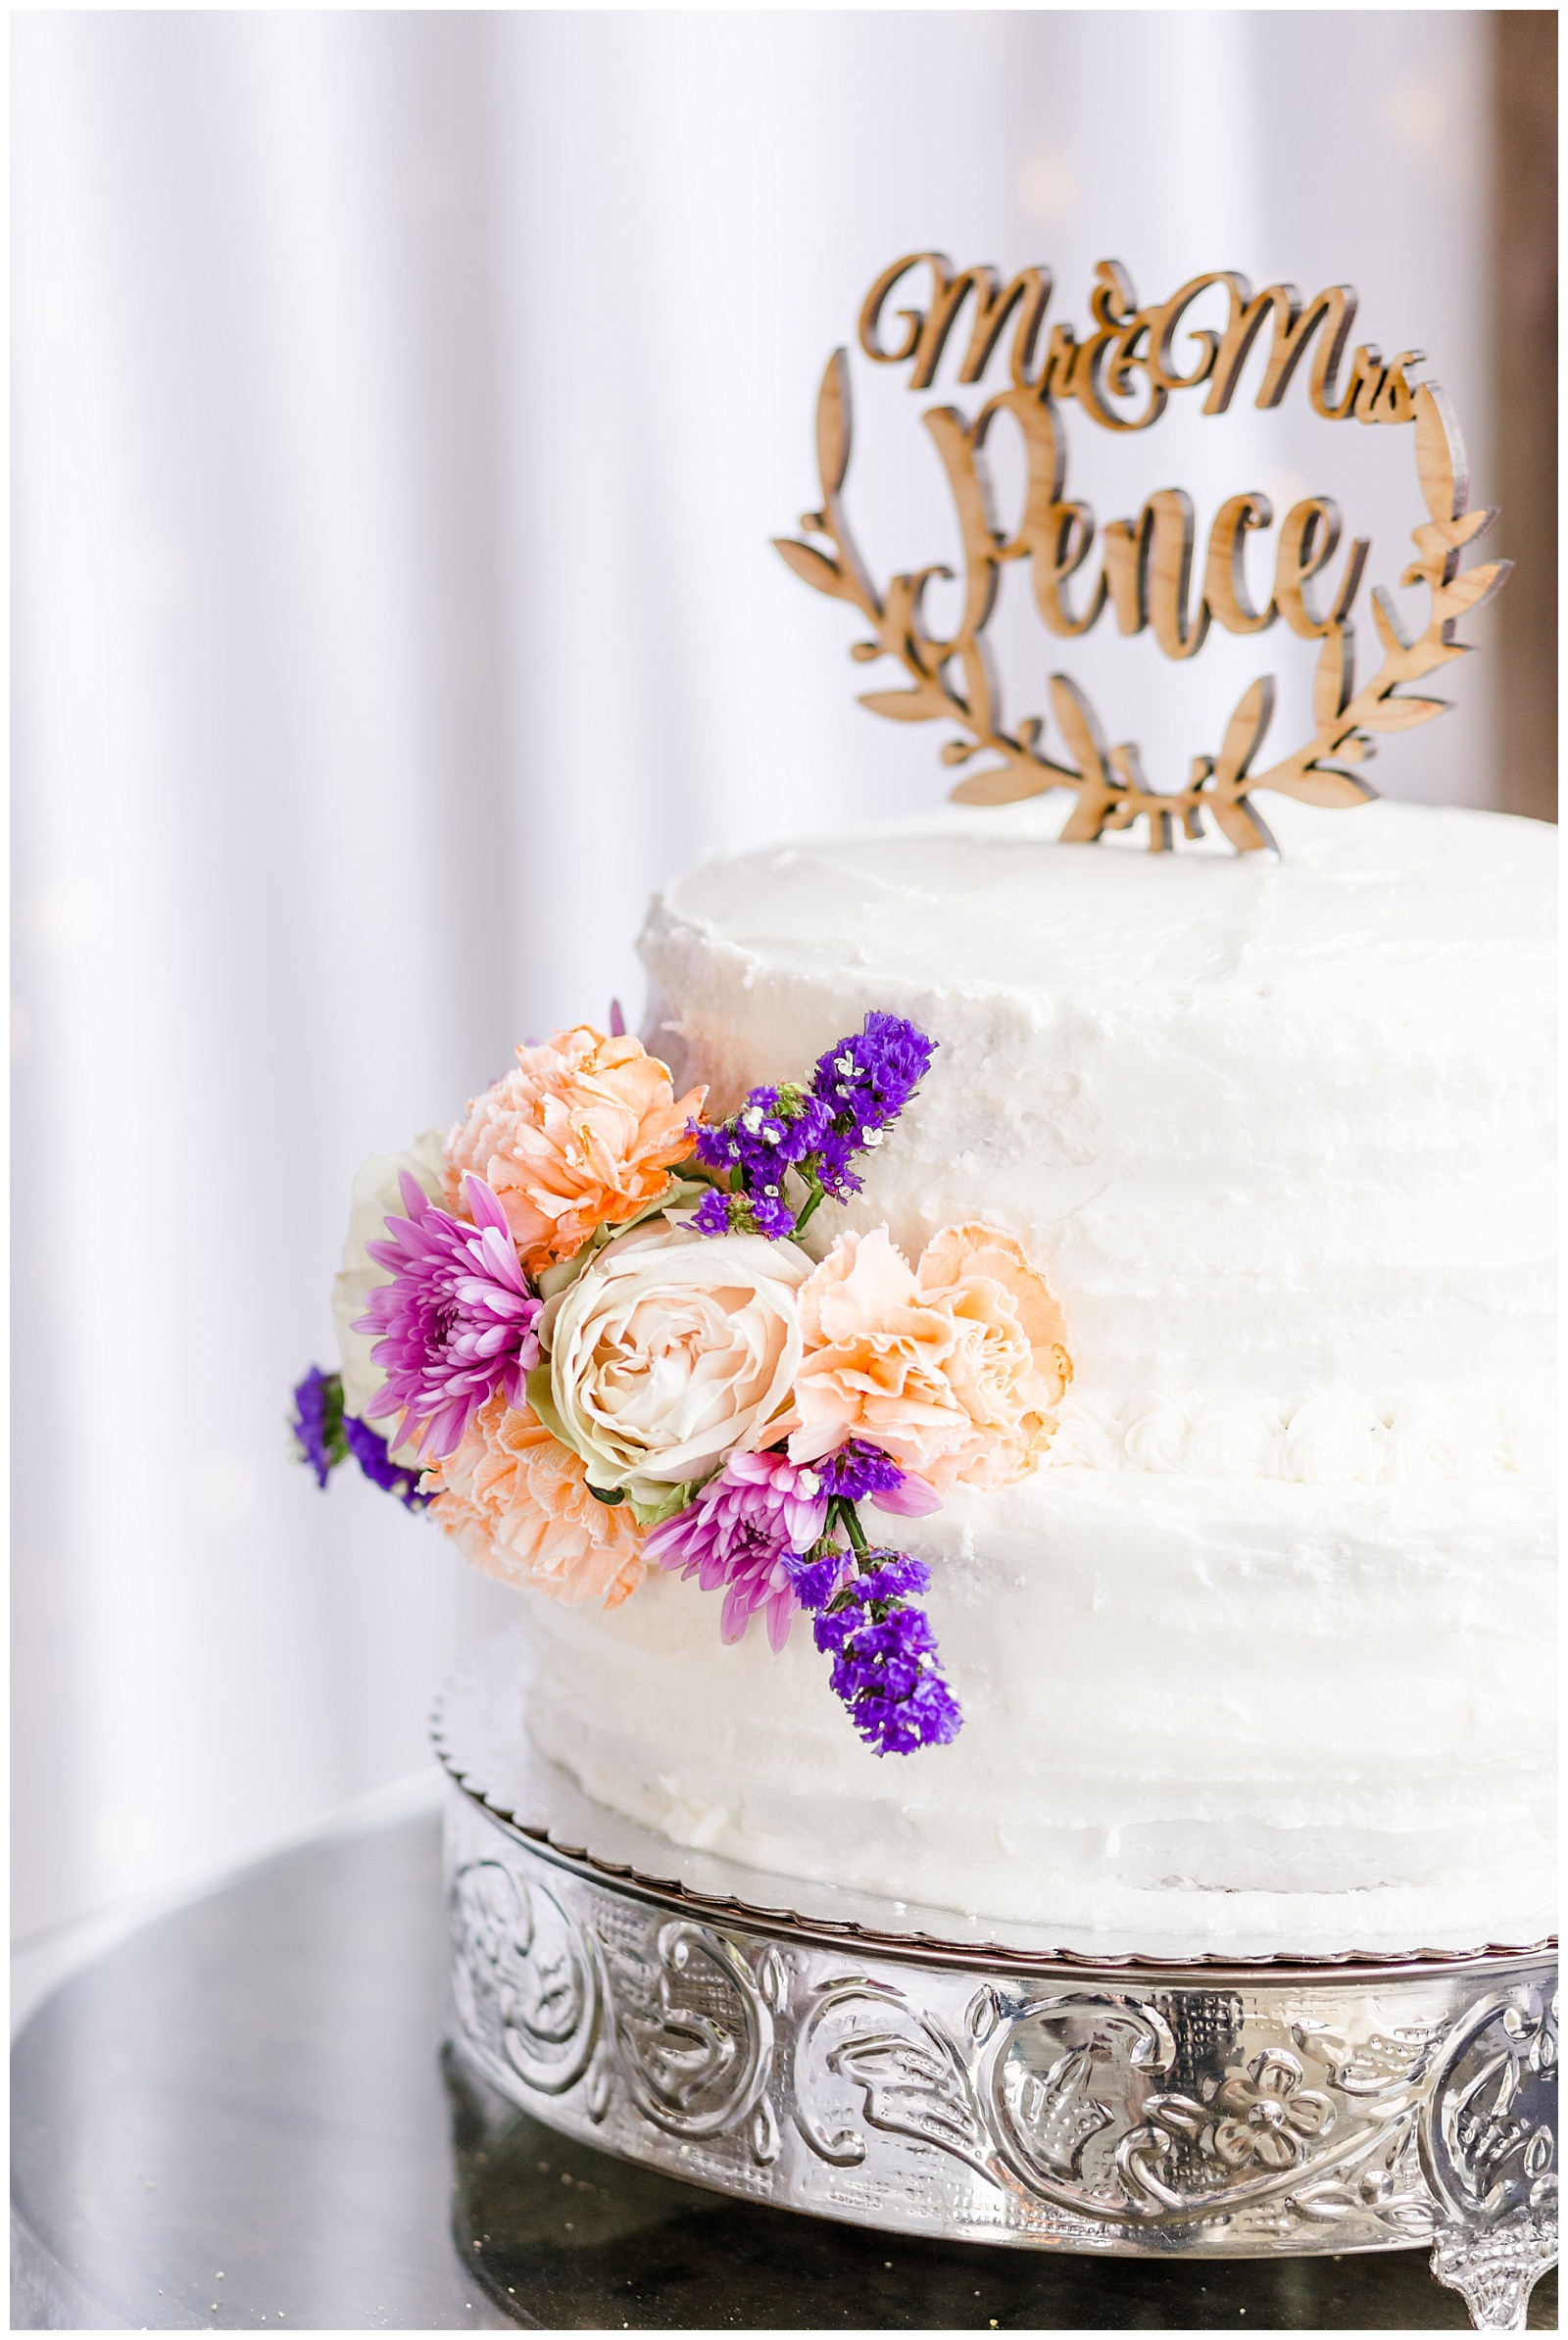 Simple white wedding cake with purple and orange flowers and gold details